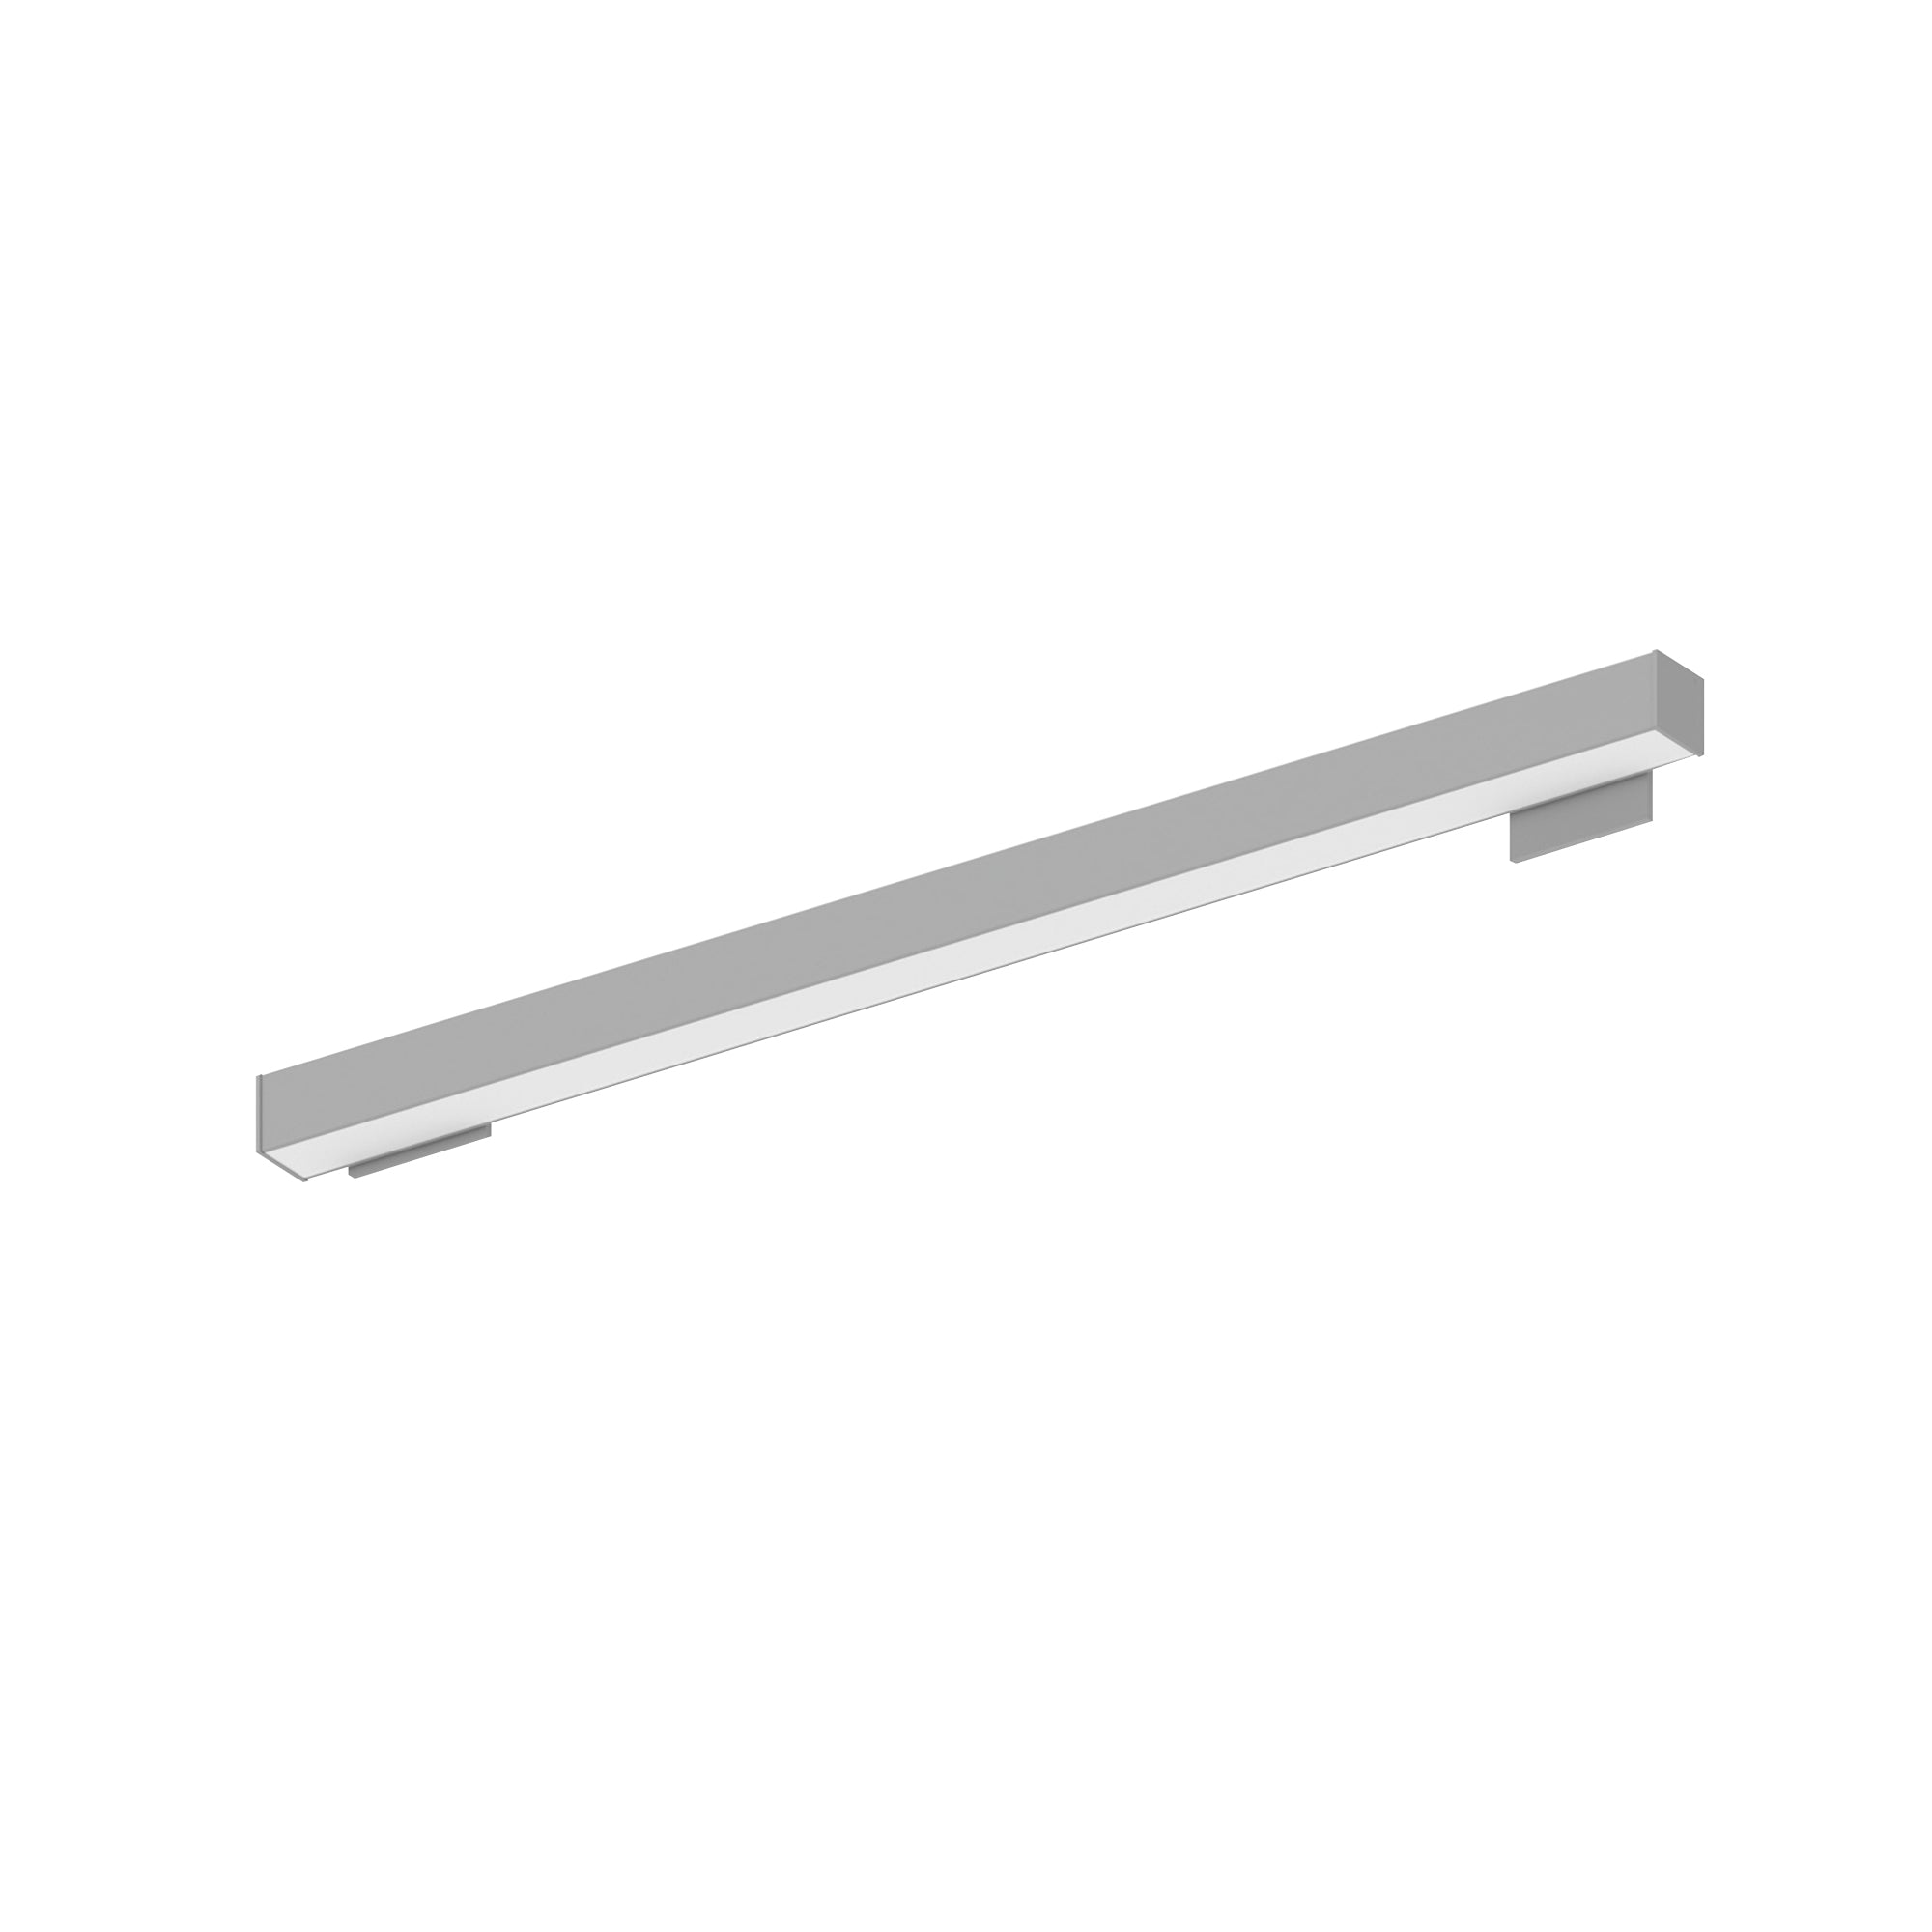 Nora Lighting NWLIN-41030A/L2P-R4 - Linear - 4' L-Line LED Wall Mount Linear, 4200lm / 3000K, 2 Inchx4 Inch Left Plate & 4 Inchx4 Inch Right Plate, Left Power Feed, Aluminum Finish